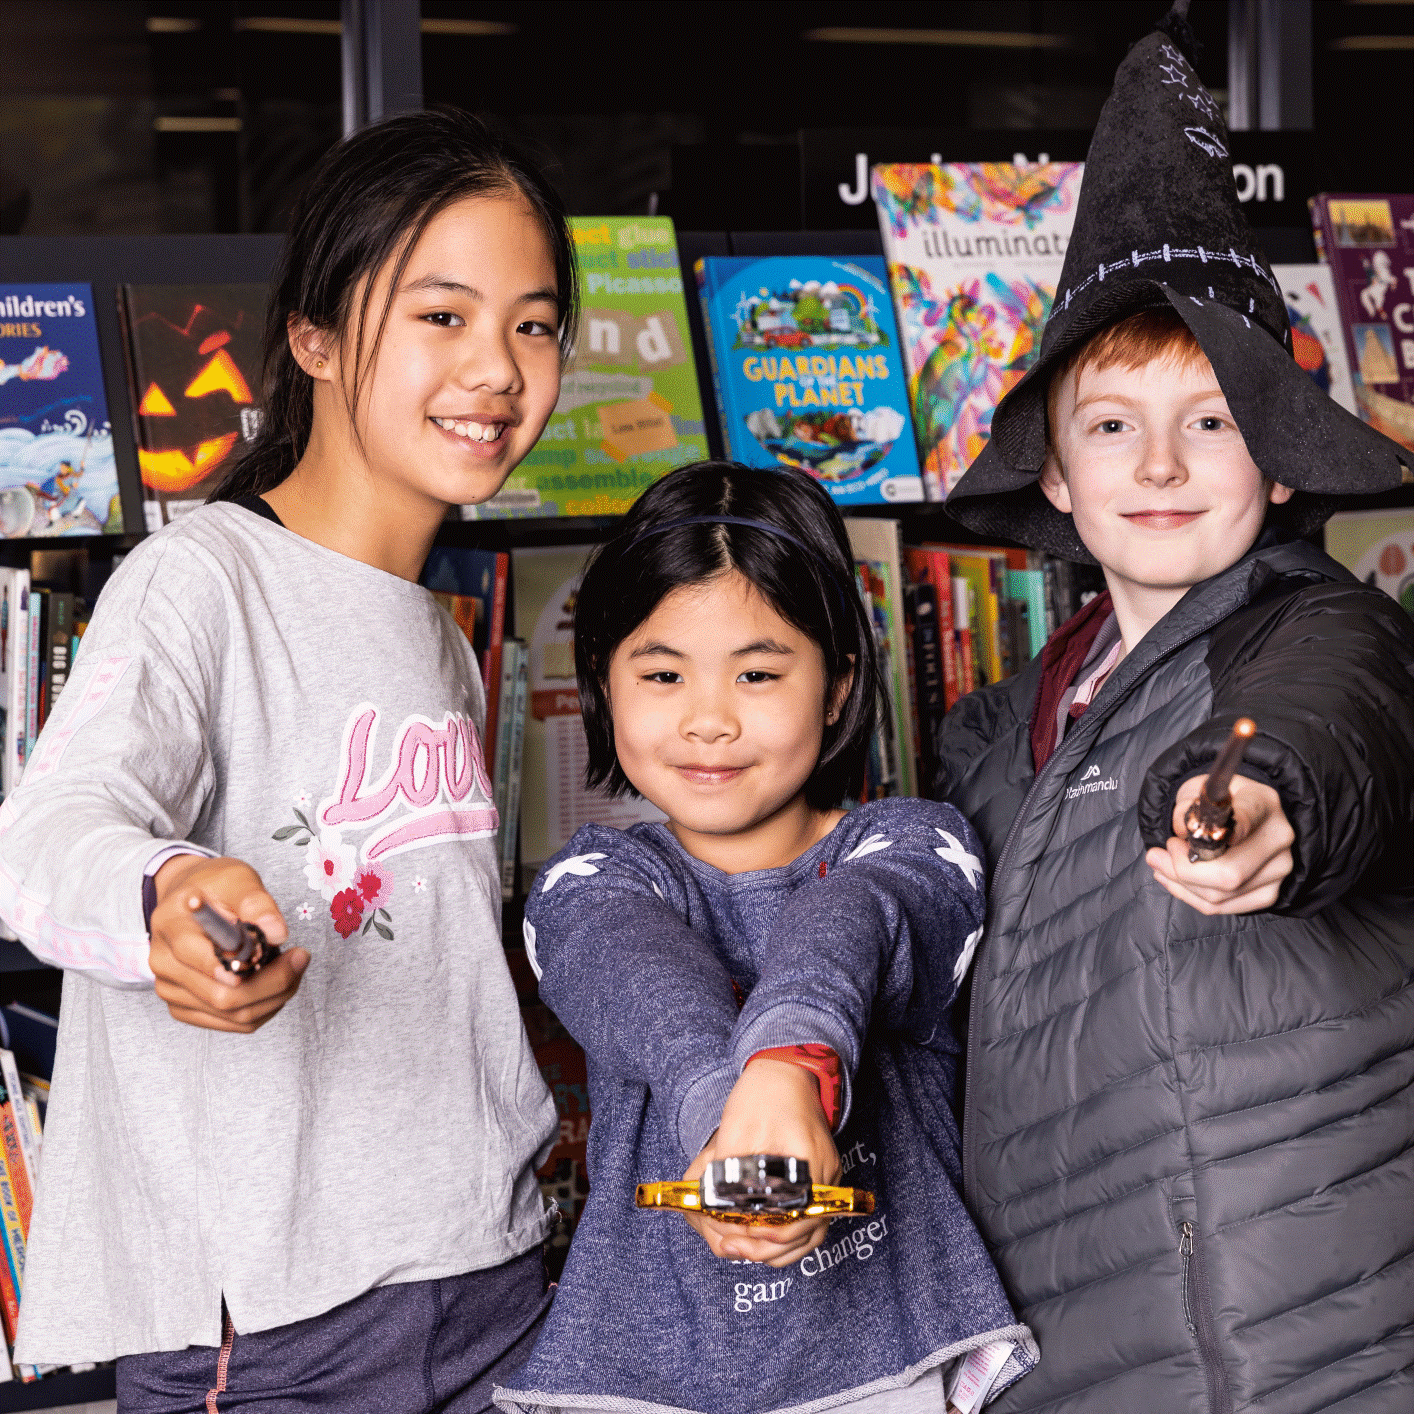 Three children in costume, participating in the summer reading program.